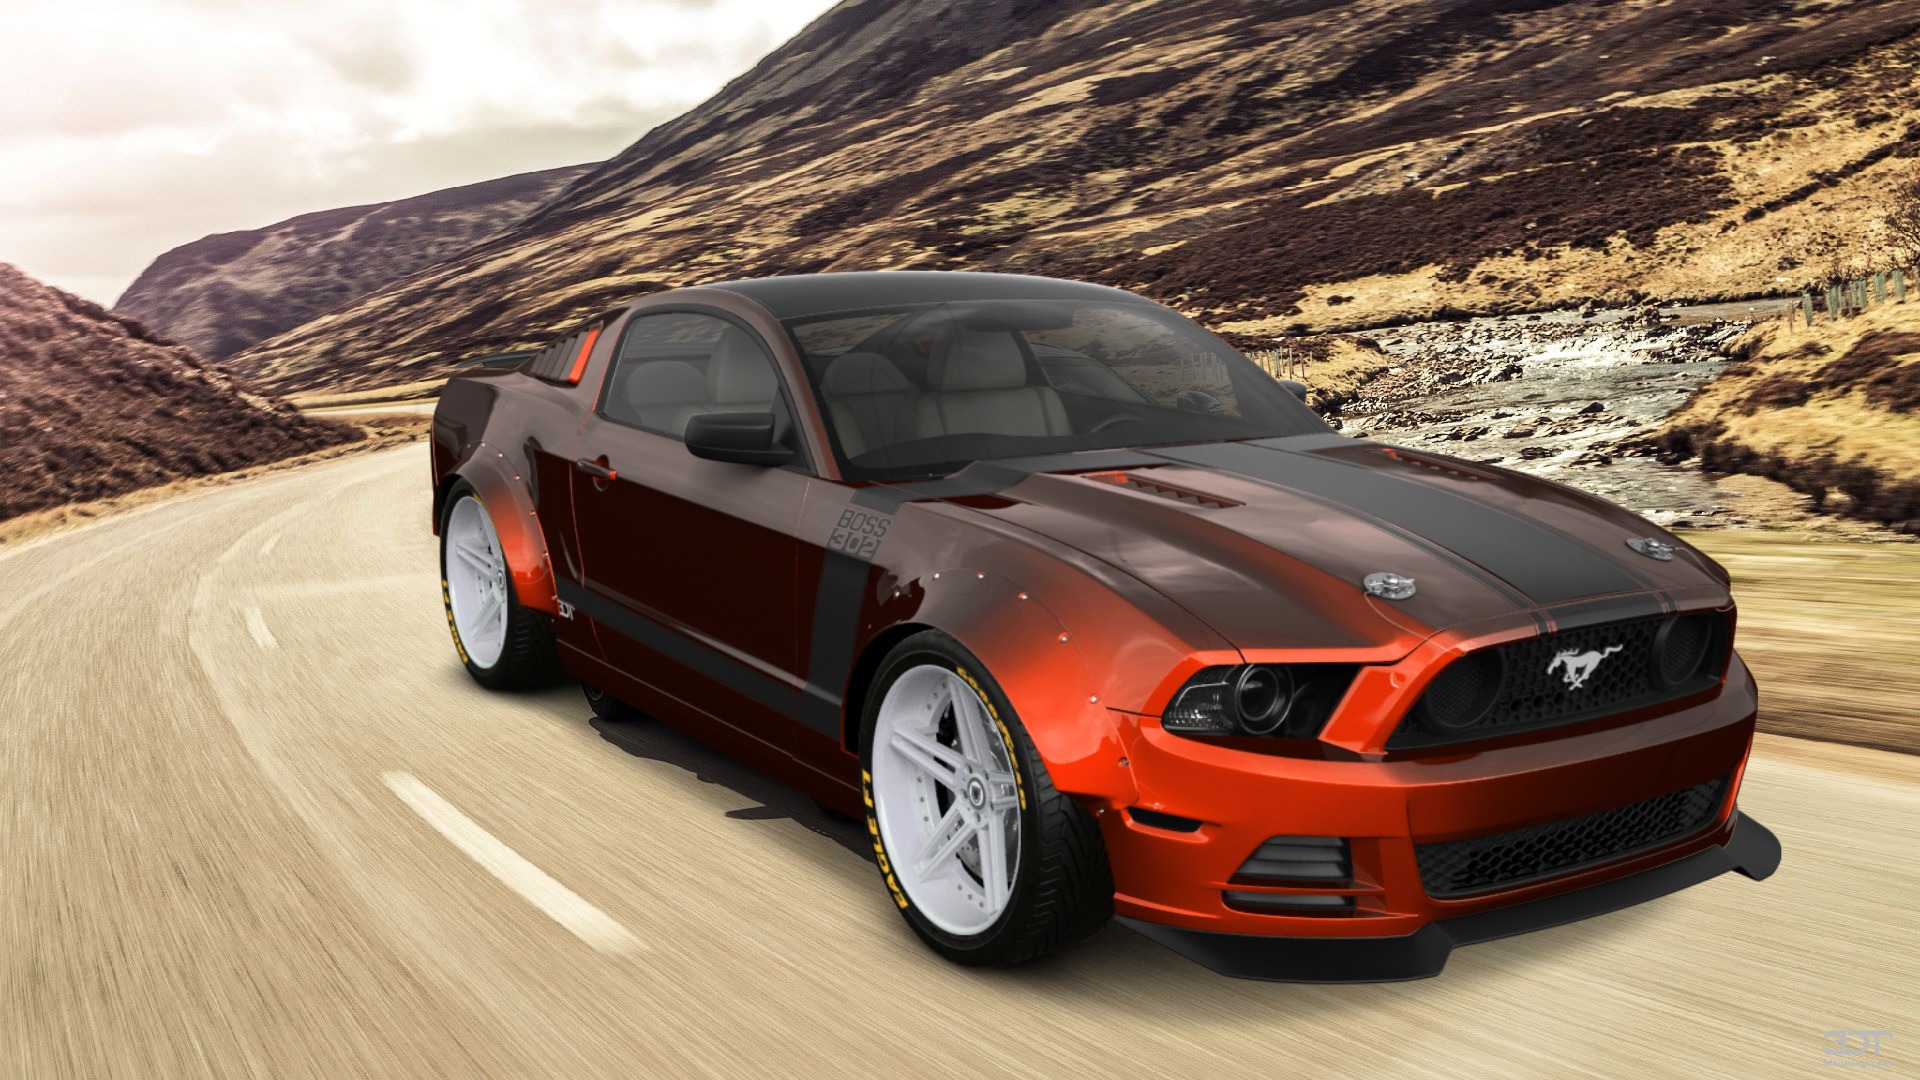 Ford Mustang 2 Door Coupe 2013 tuning